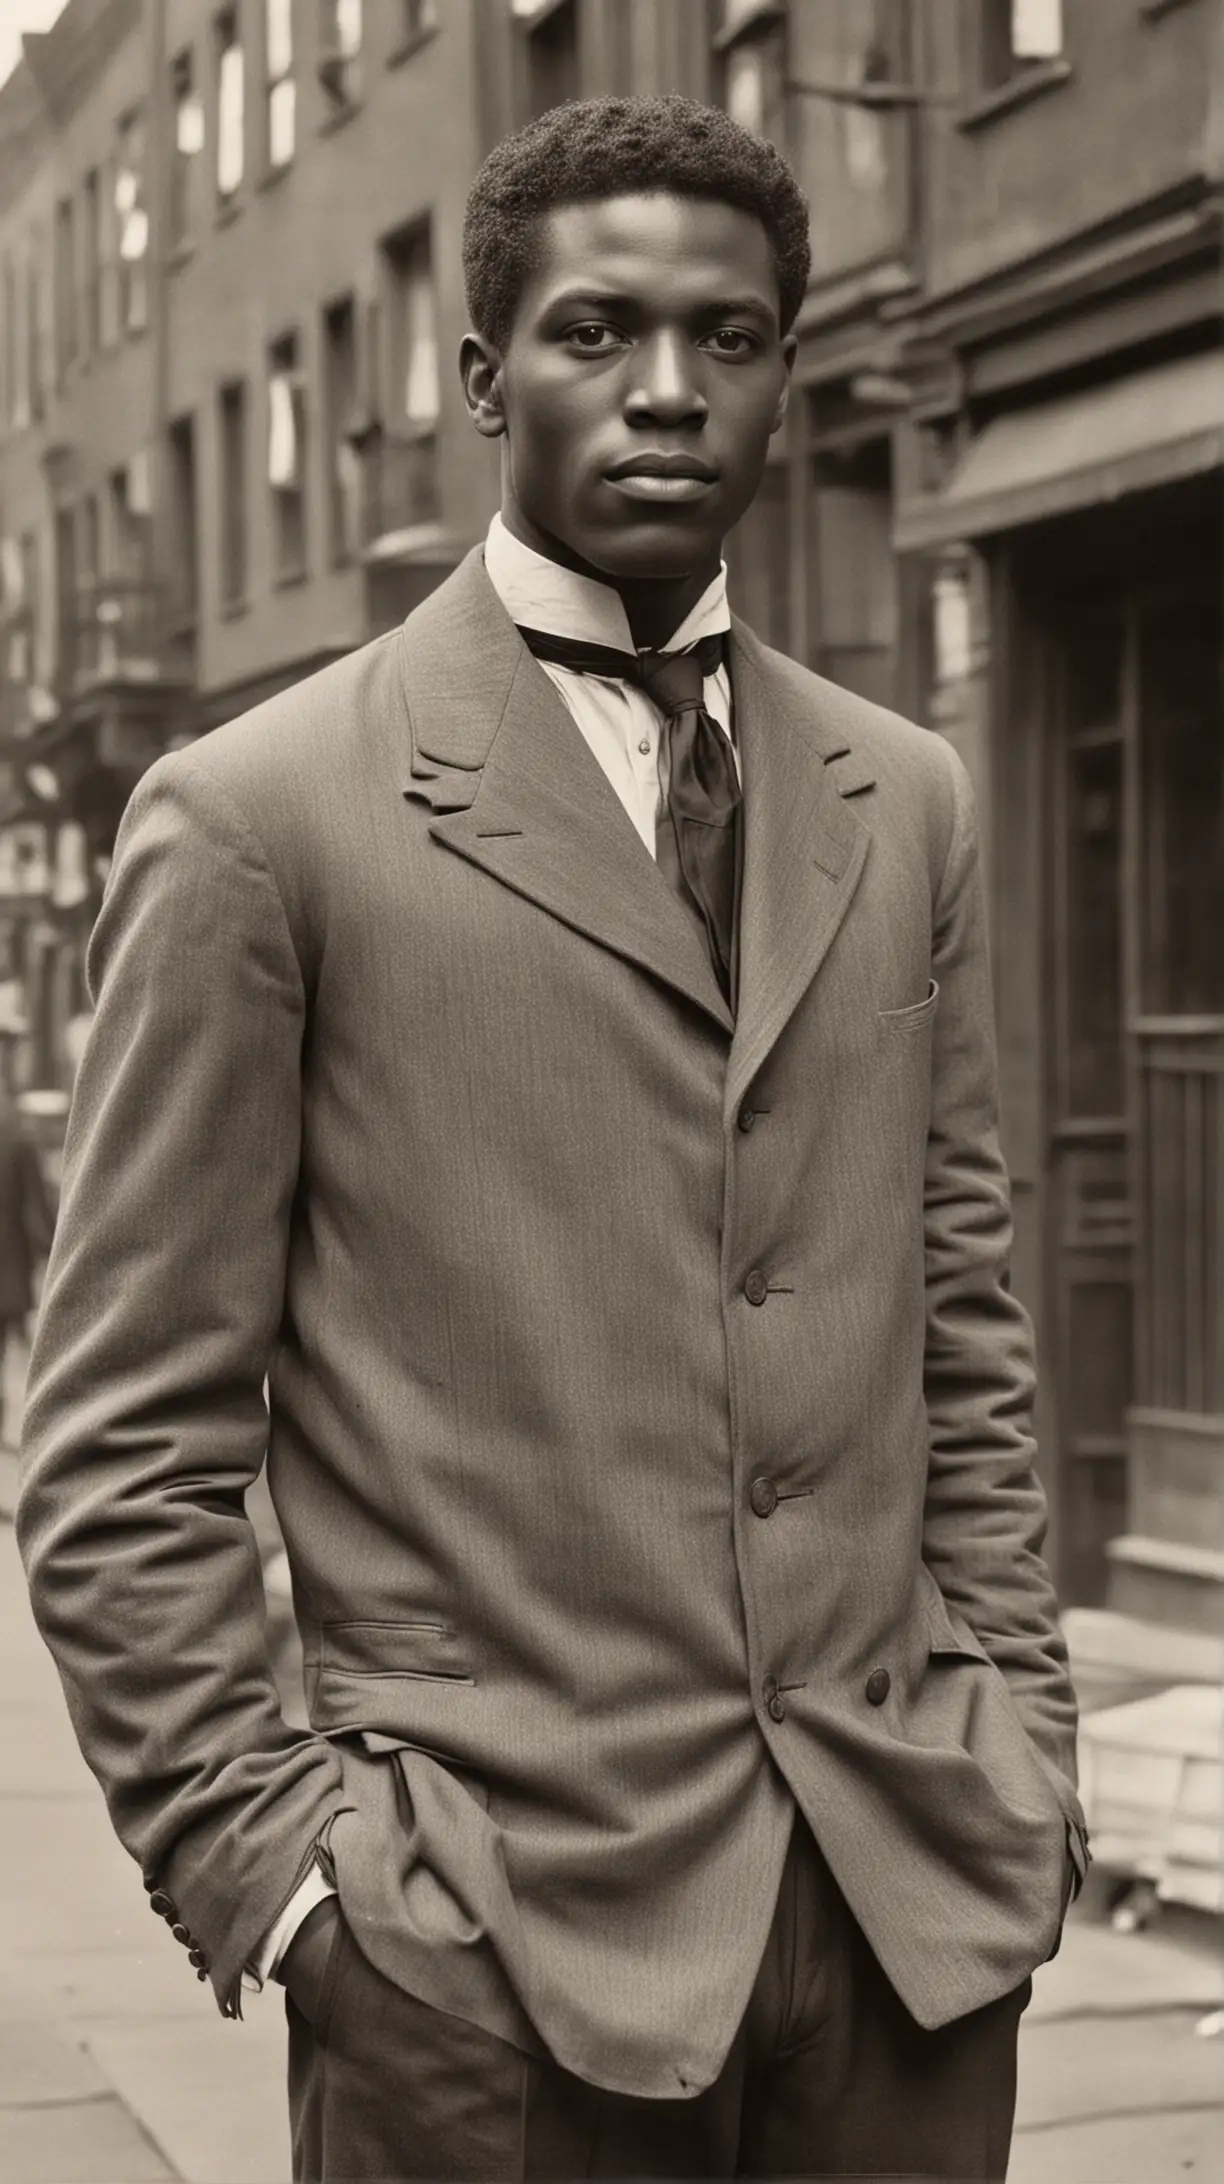 Handsome Black Man Standing in the City 1900s Style Portrait